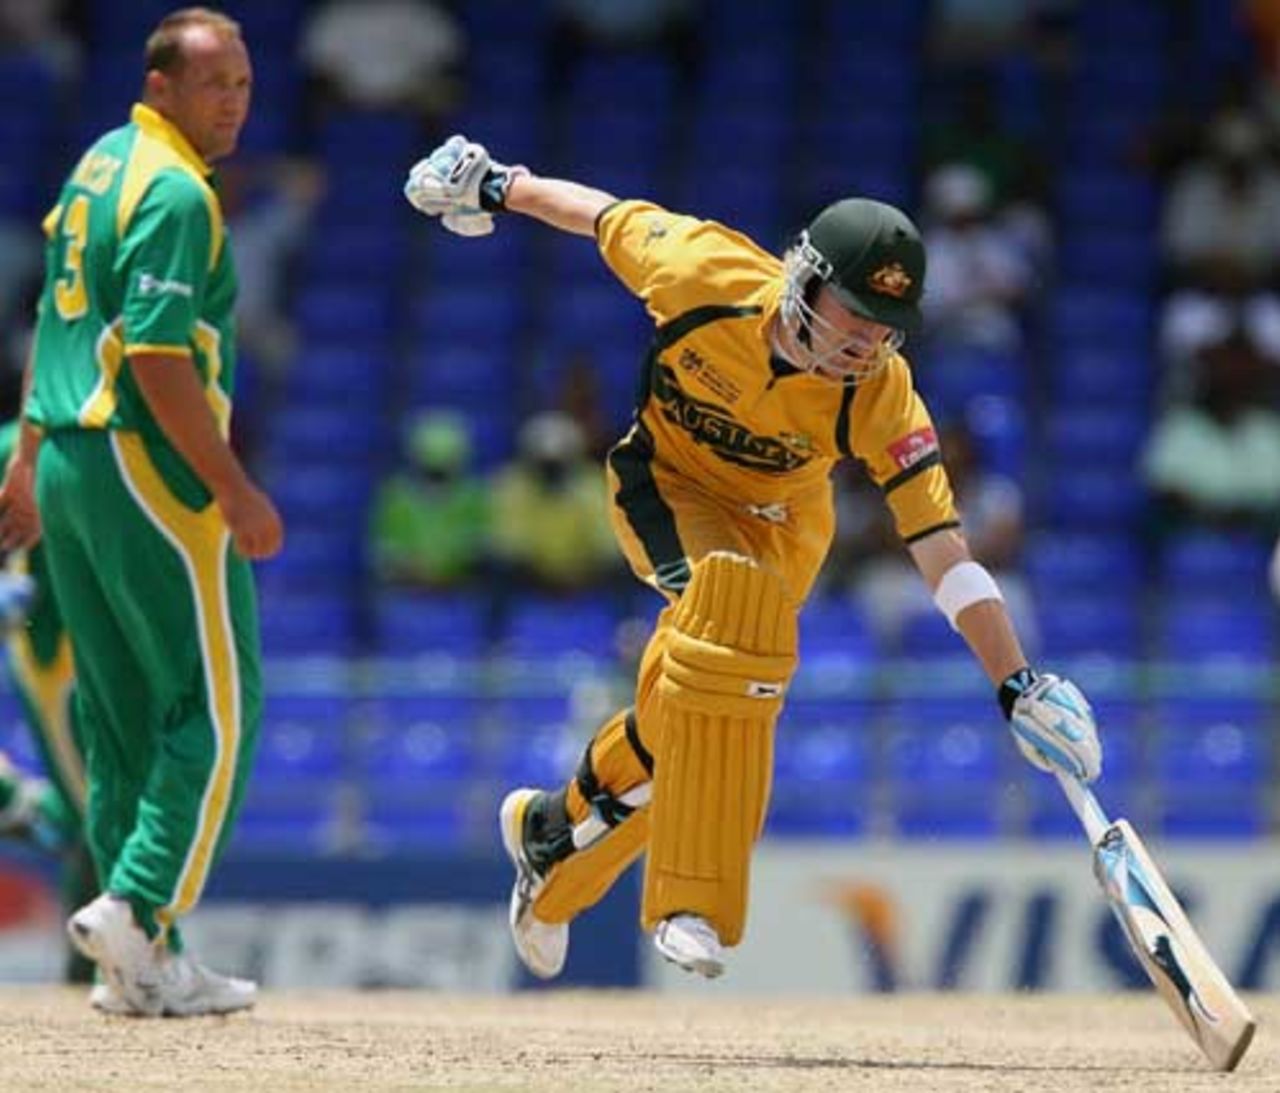 Michael Clarke lunges to complete a run, Australia v South Africa, Group A, St Kitts, March 24, 2007